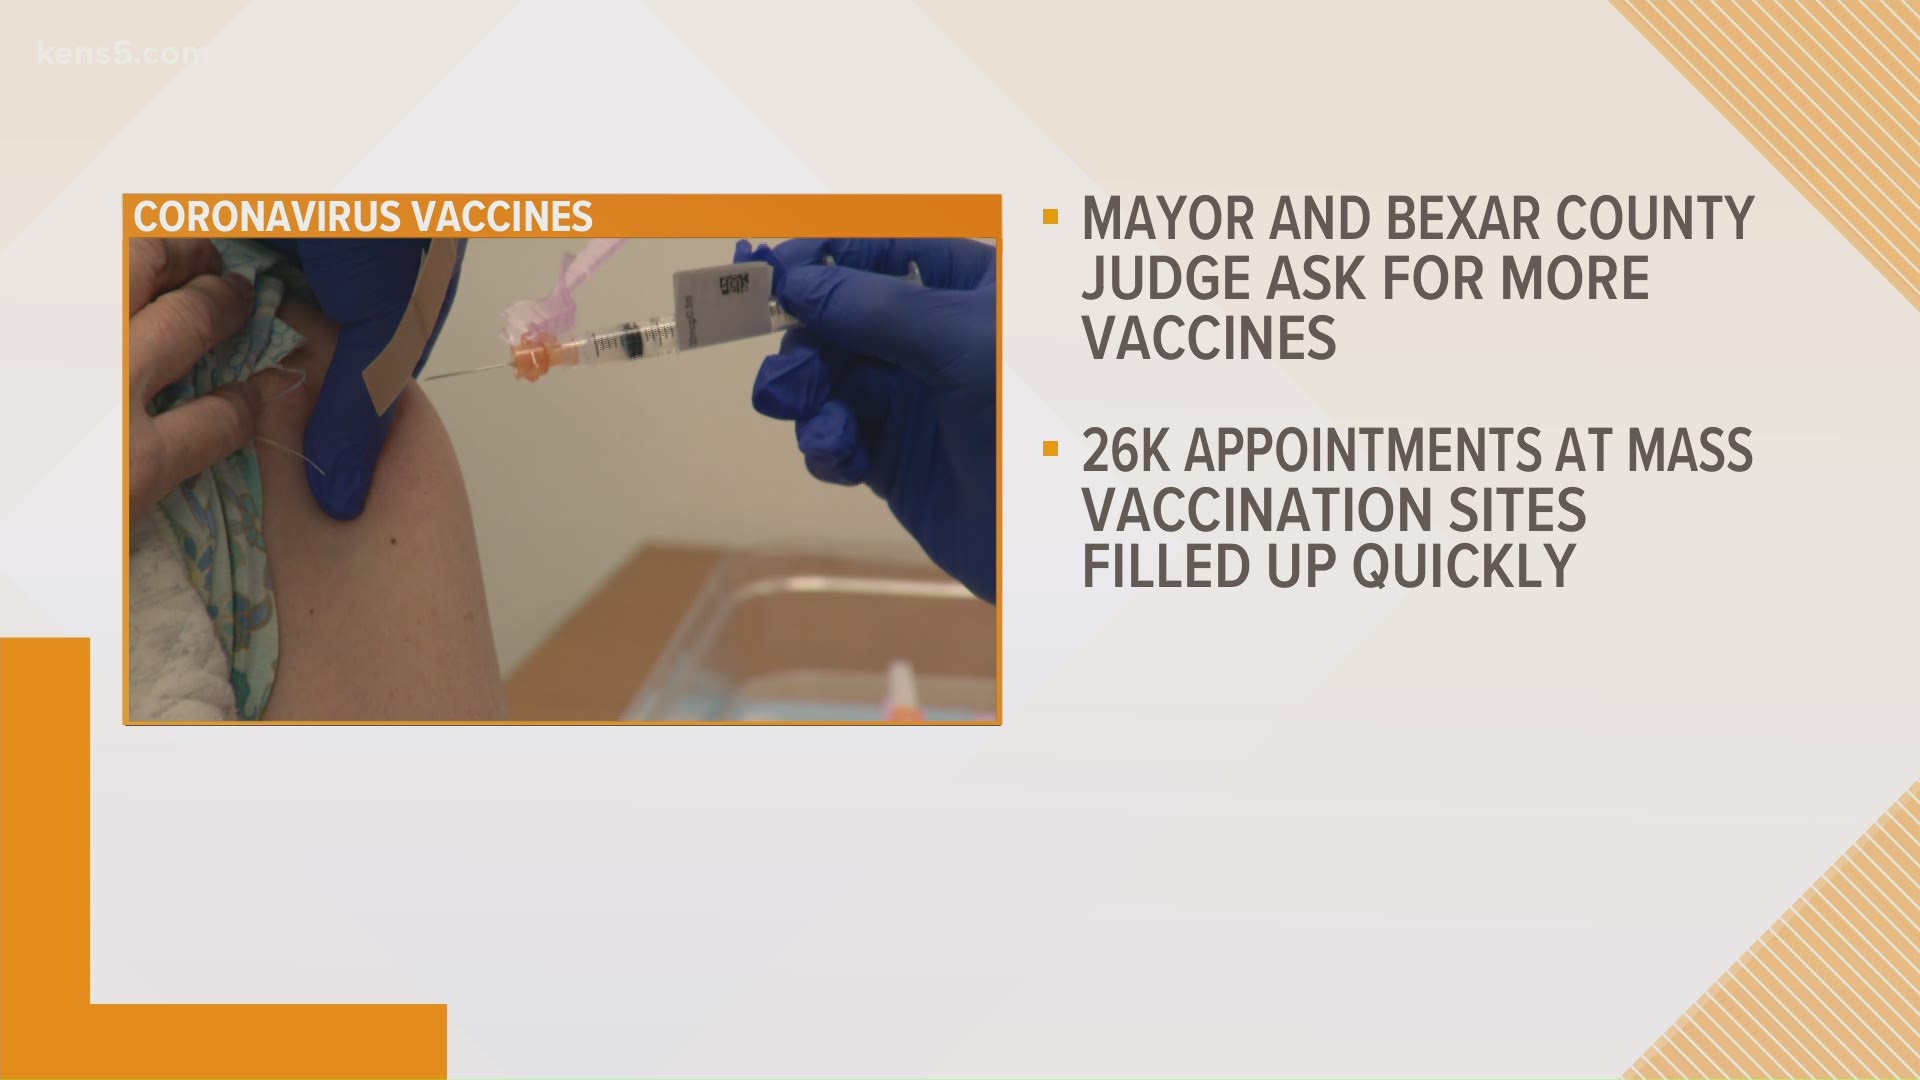 Mayor Nirenberg and Judge Nelson Wolff sent a letter to Gov. Abbott requesting more vaccines to be distributed to Bexar County "as soon as possible."